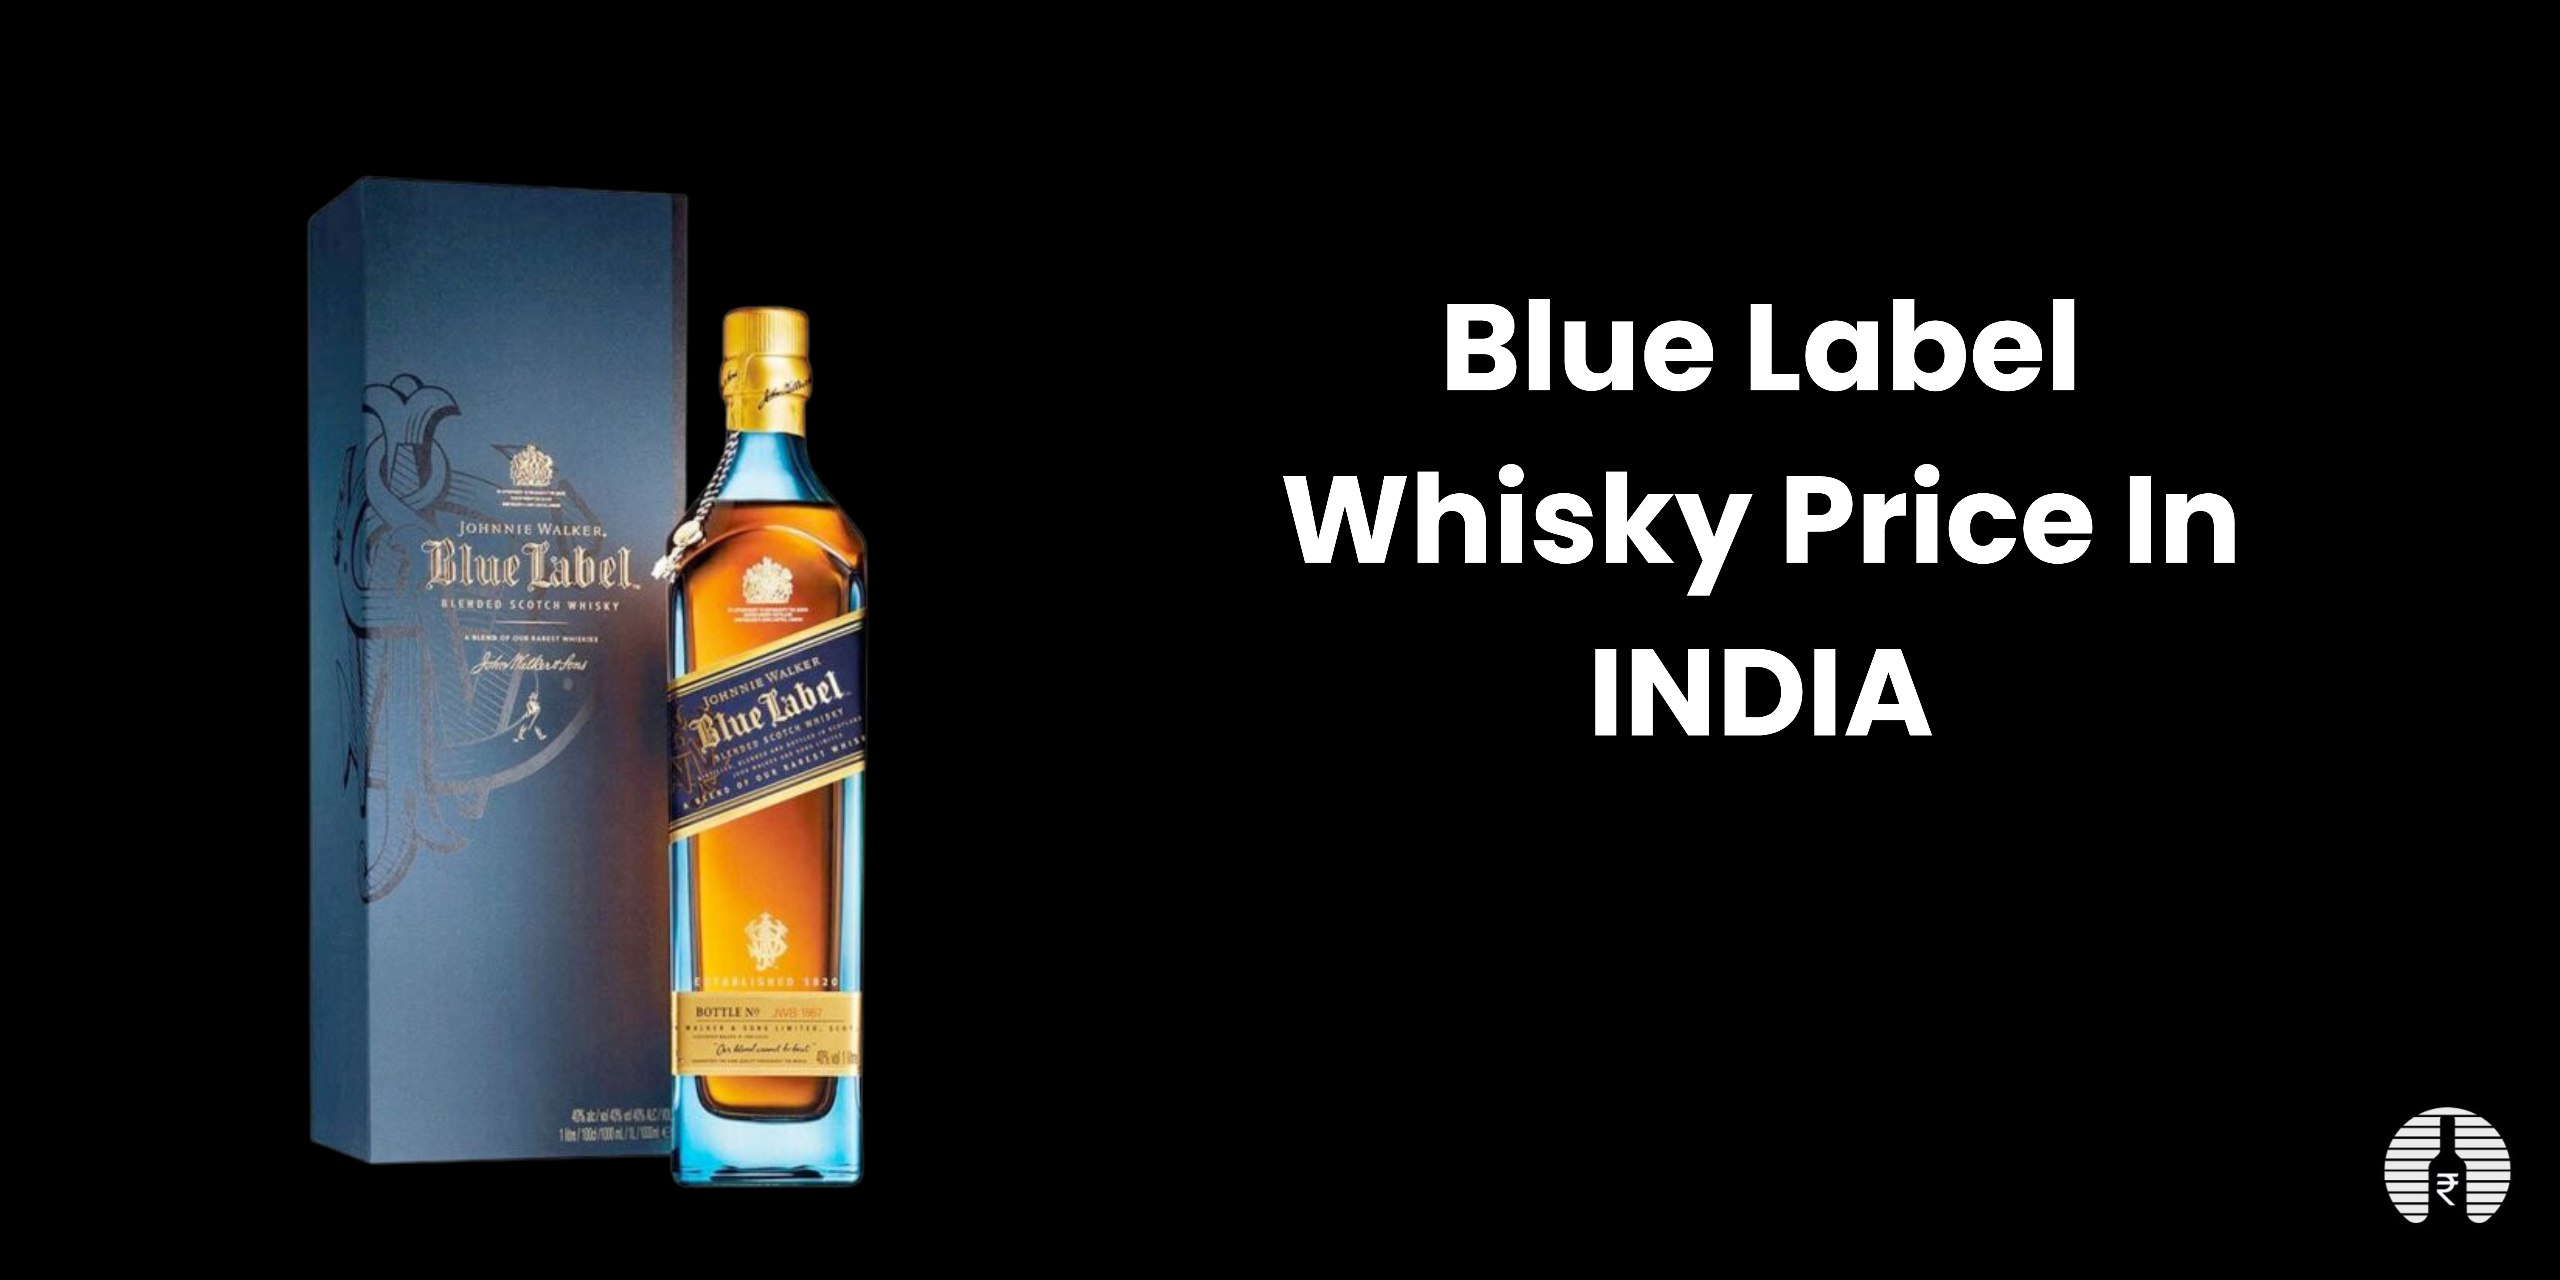 Blue Label Whisky Price in India